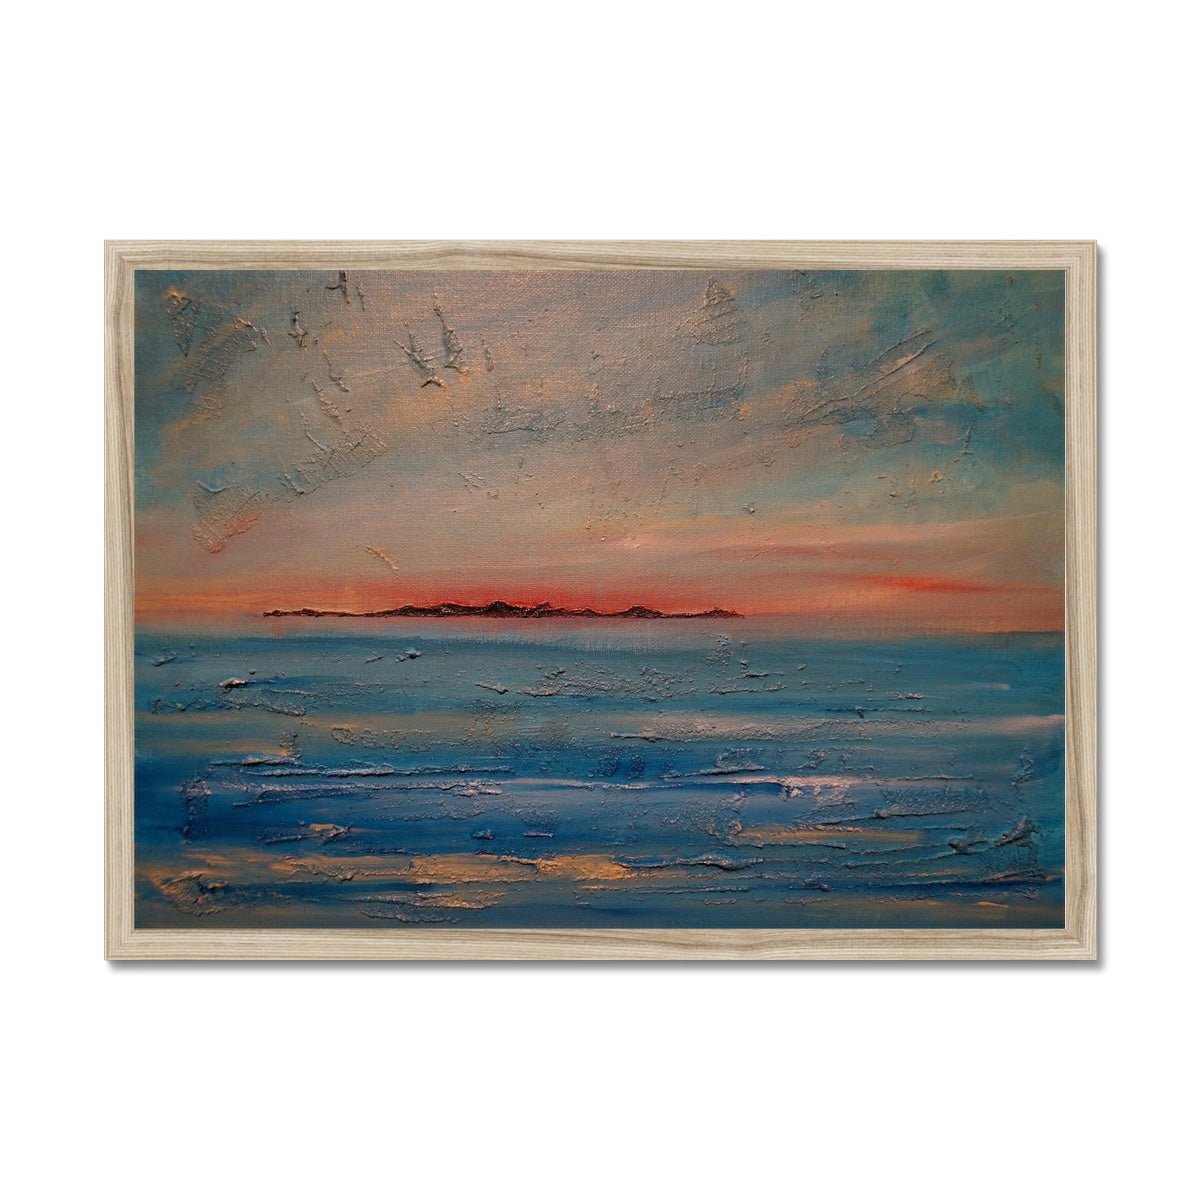 Gigha Sunset Painting | Framed Prints From Scotland-Framed Prints-Hebridean Islands Art Gallery-A2 Landscape-Natural Frame-Paintings, Prints, Homeware, Art Gifts From Scotland By Scottish Artist Kevin Hunter